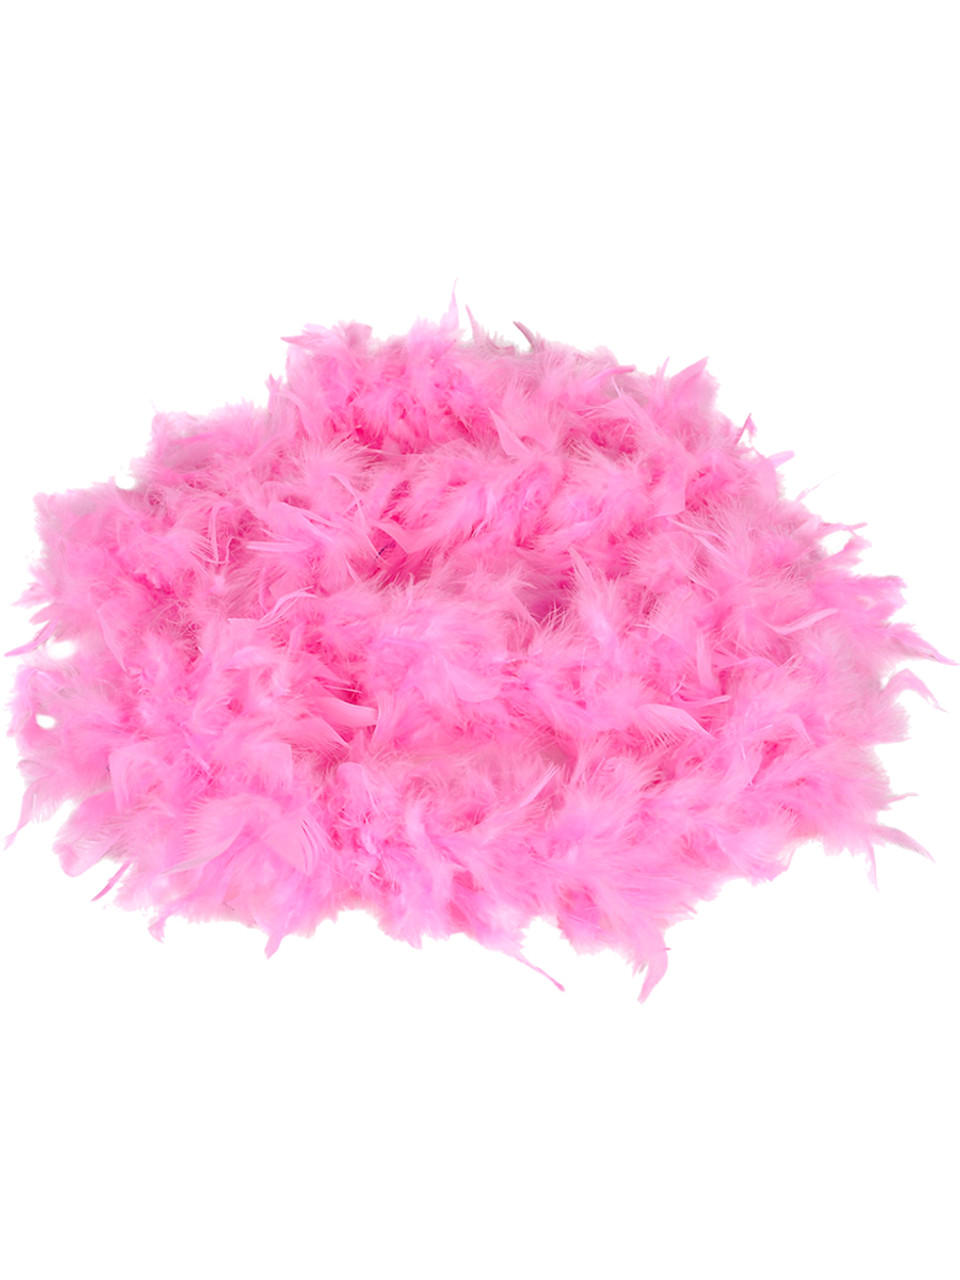 72 Feather Boas (60gm) Red